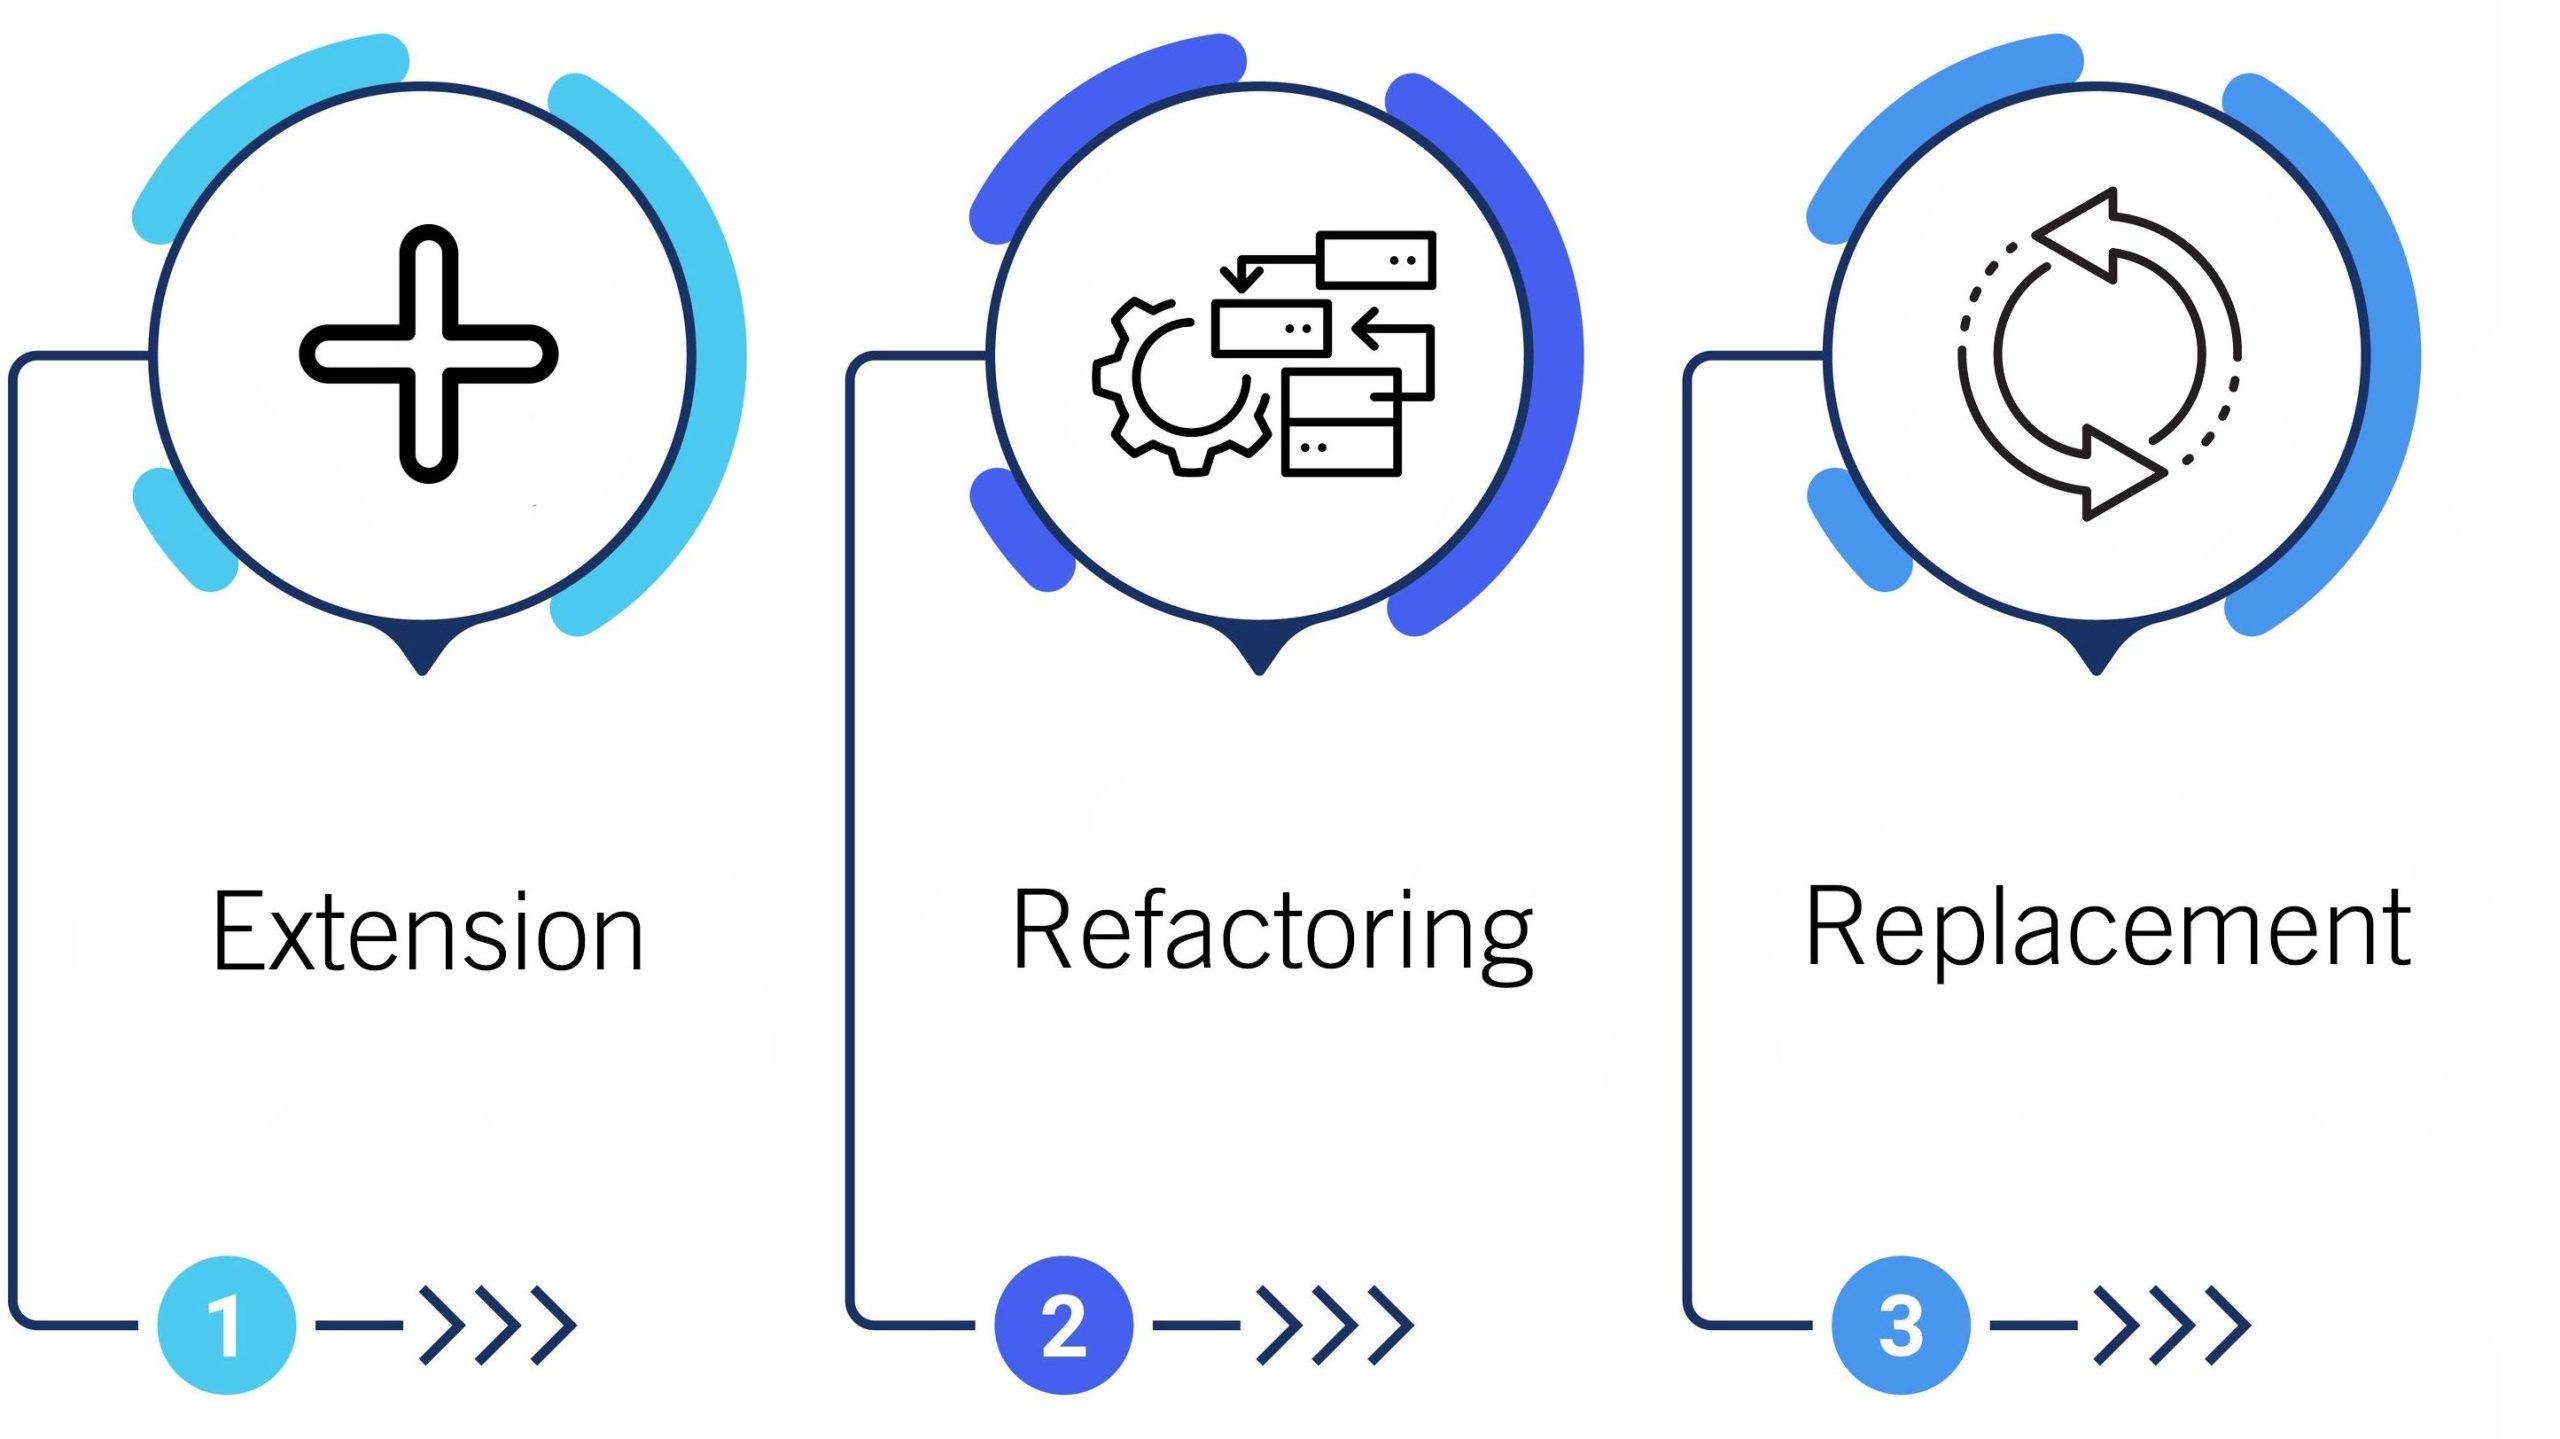 Extension, refactoring and replacement